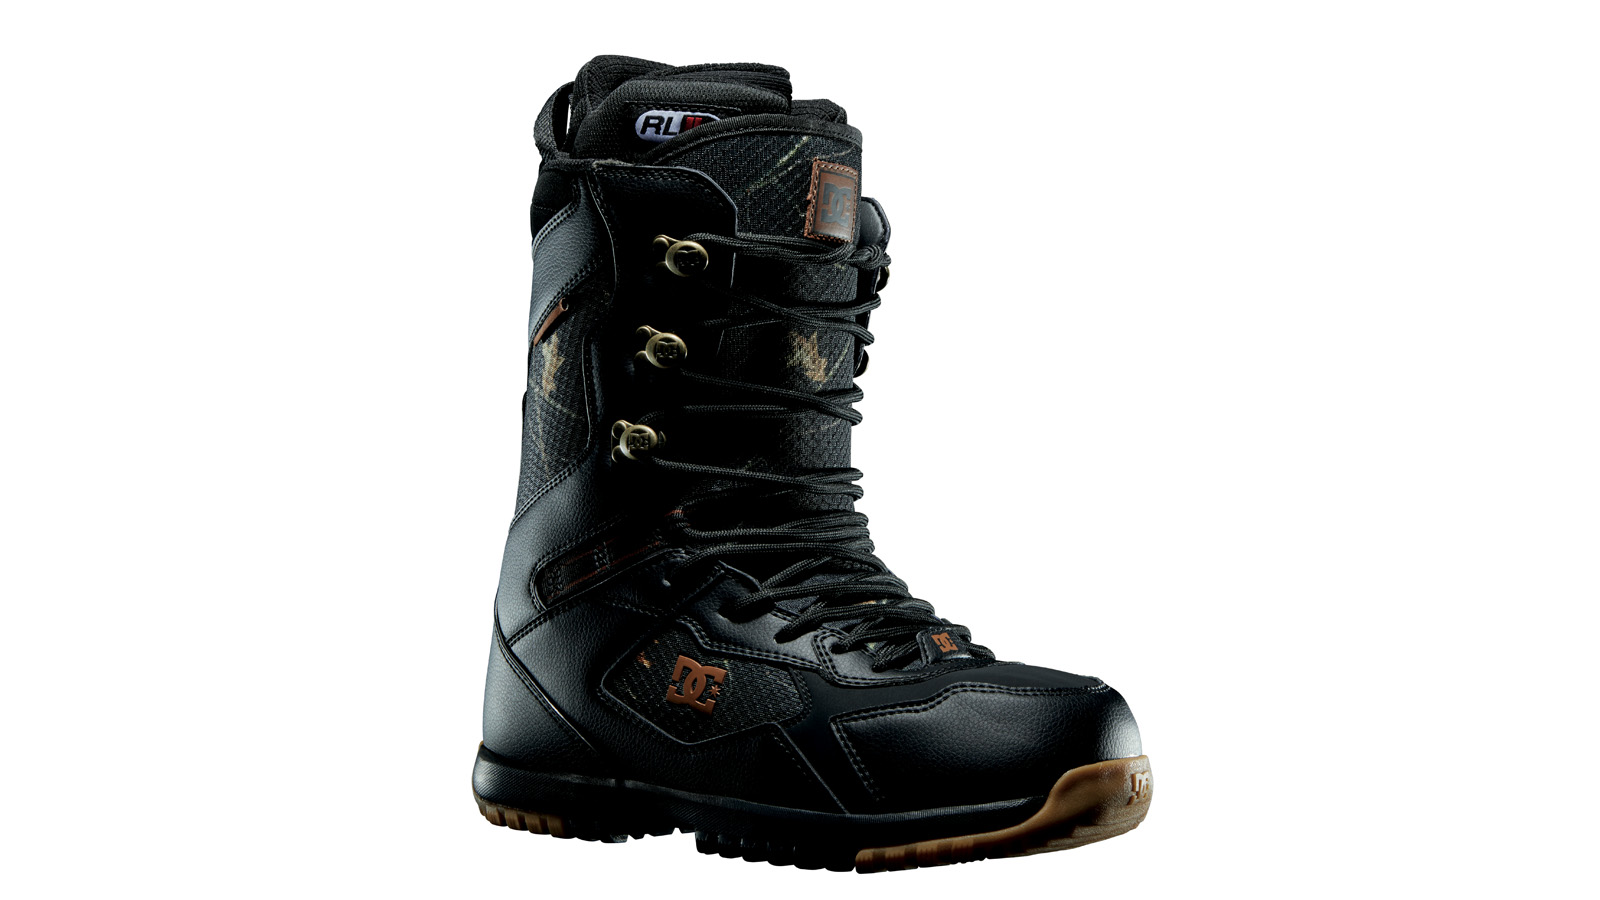 DC 21/22 Snowboard Boots